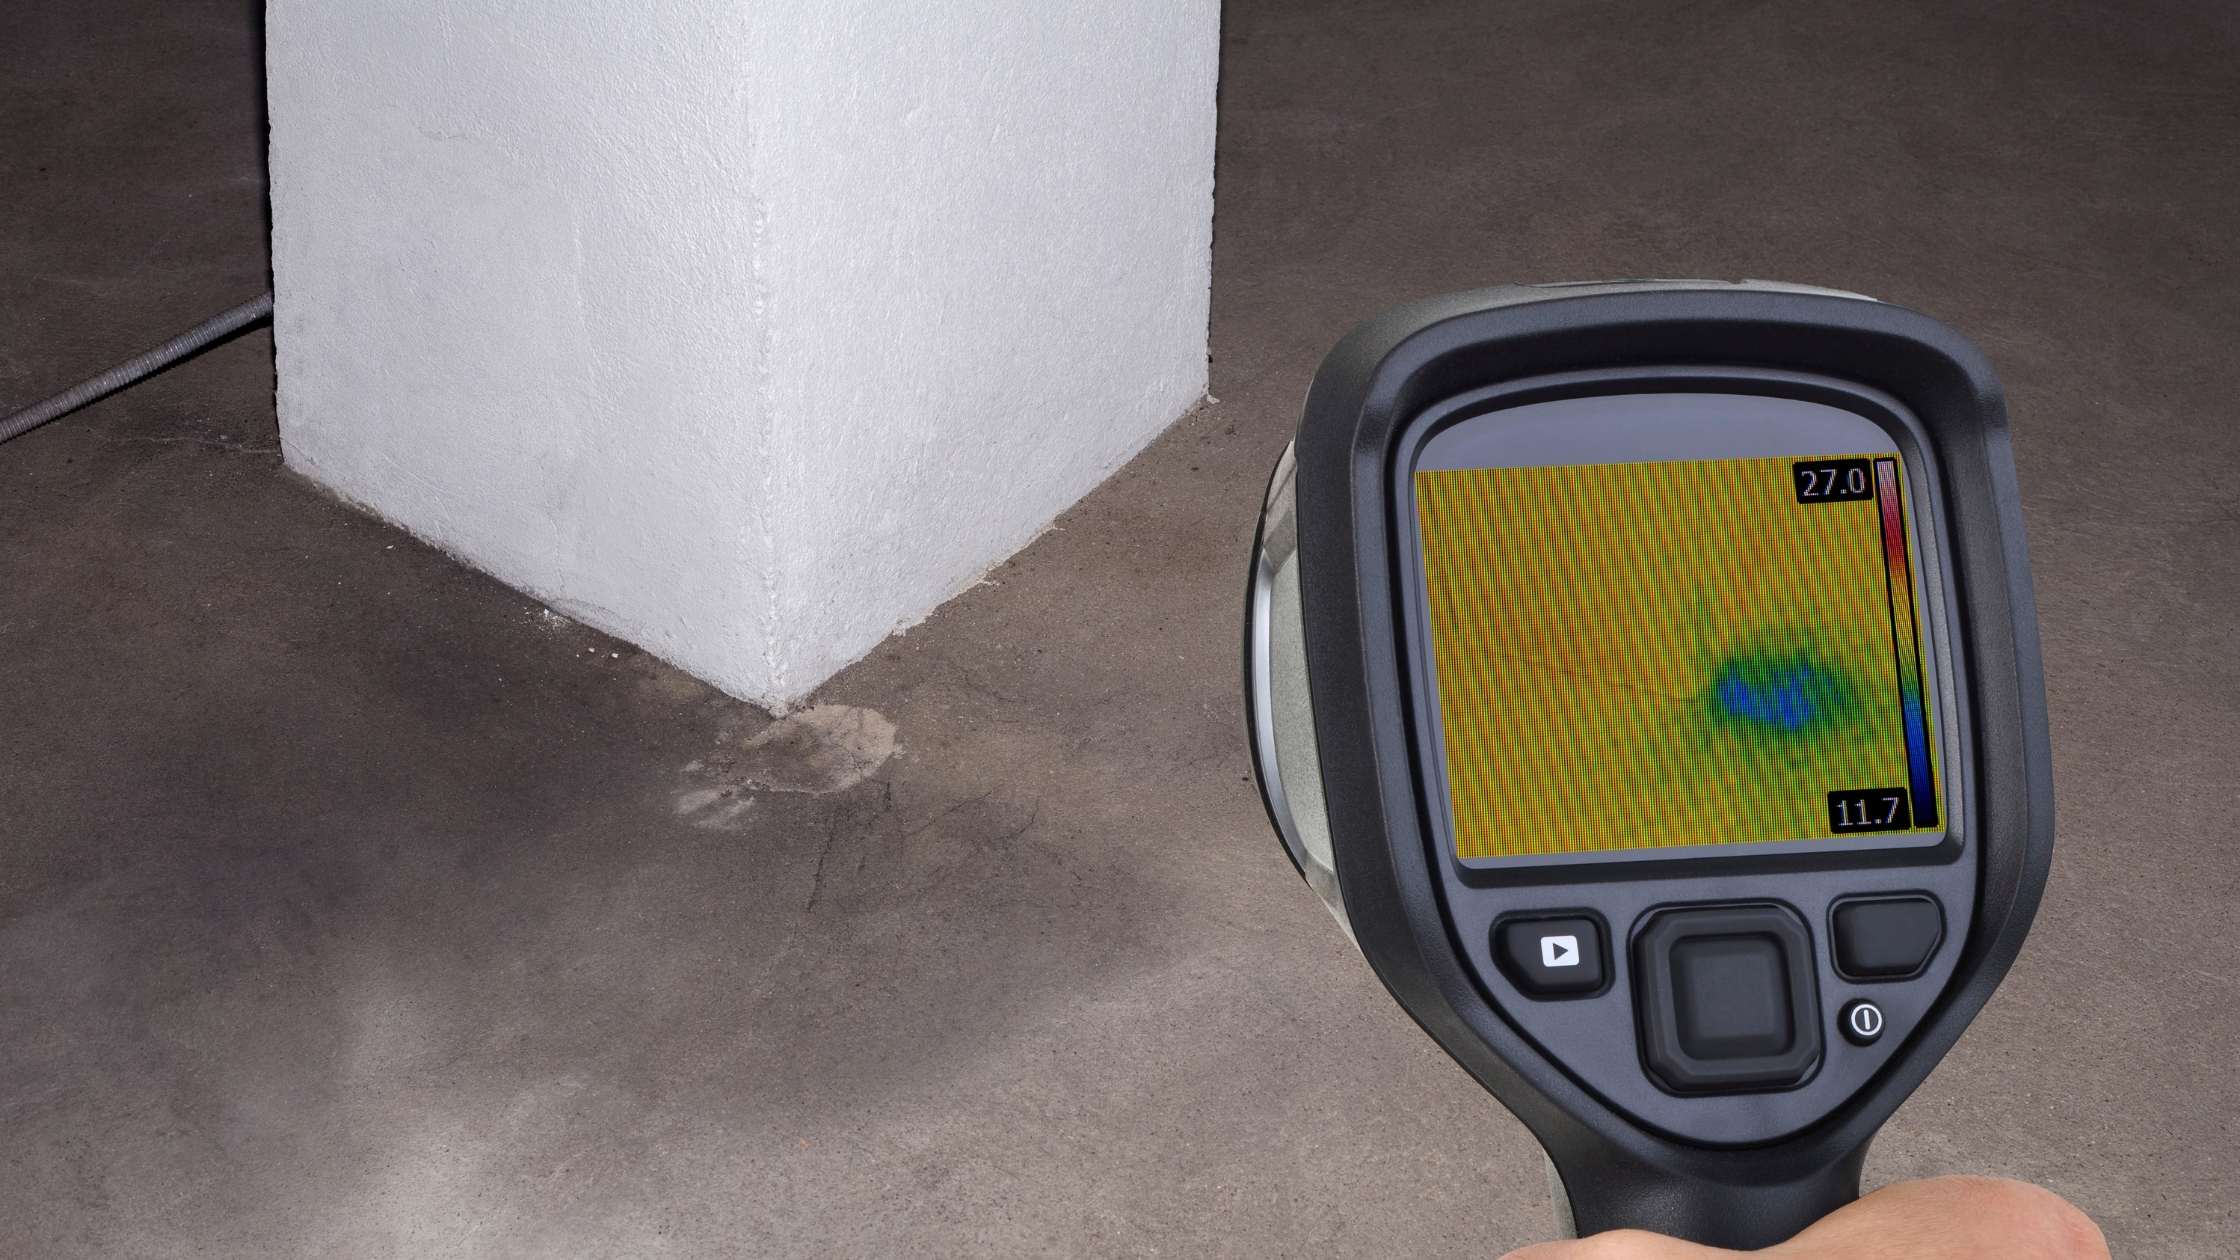 The High-Tech Home Inspection